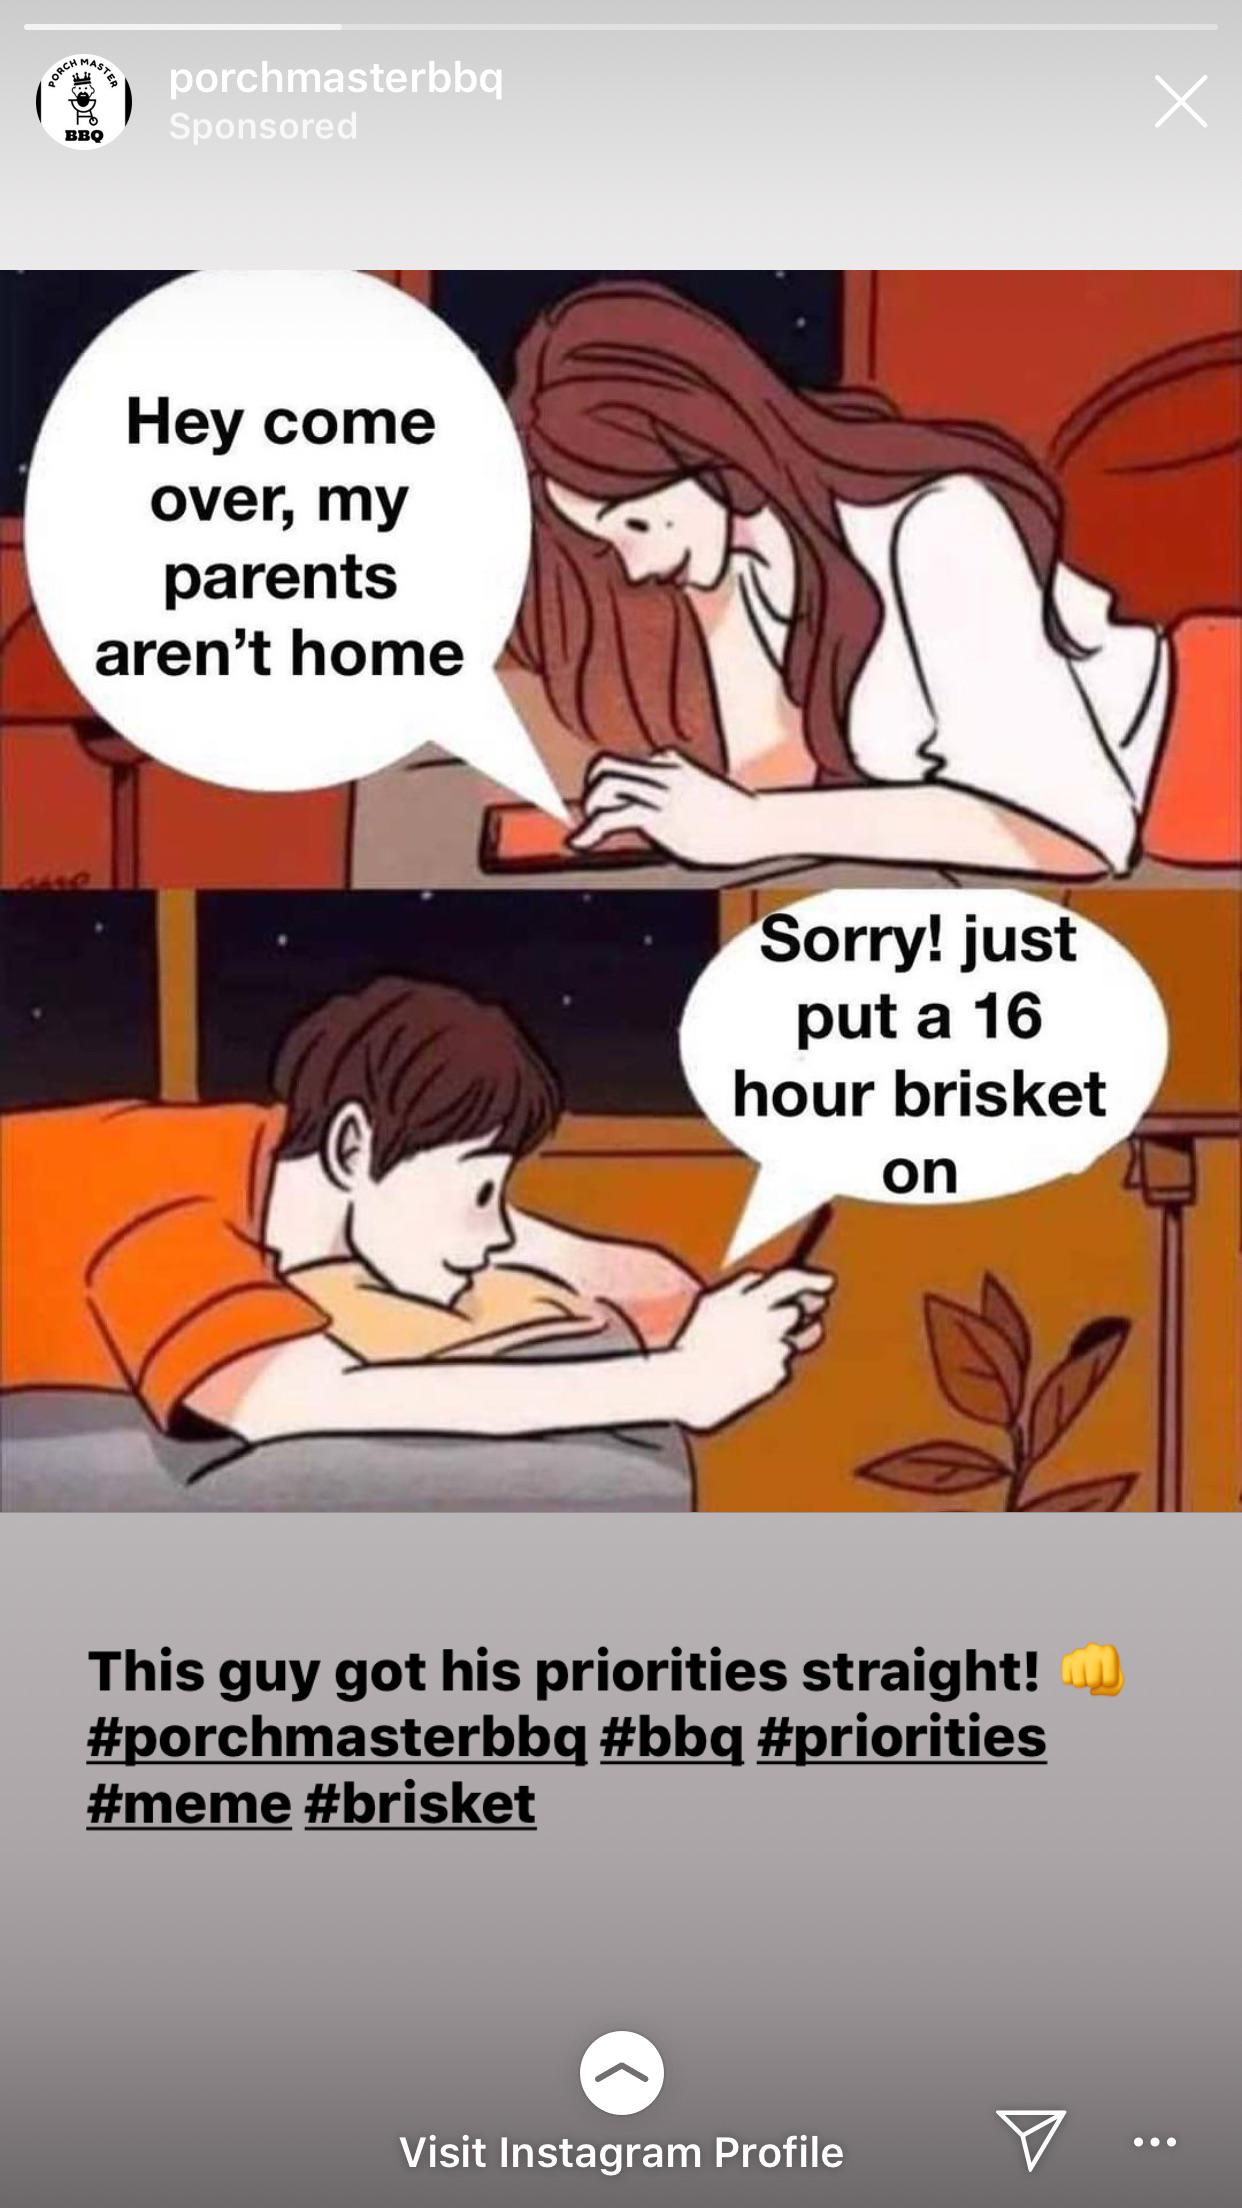 Cringe, Instagram, BBQ cringe memes Cringe, Instagram, BBQ text: BBQ porchmasterbbq Sponsored Hey come over, my parents aren't home Sorry! just put a 16 hour brisket on This guy got his priorities straight! #porchmasterbbq #bbq #priorities #meme #brisket Visit Instagram Profile 